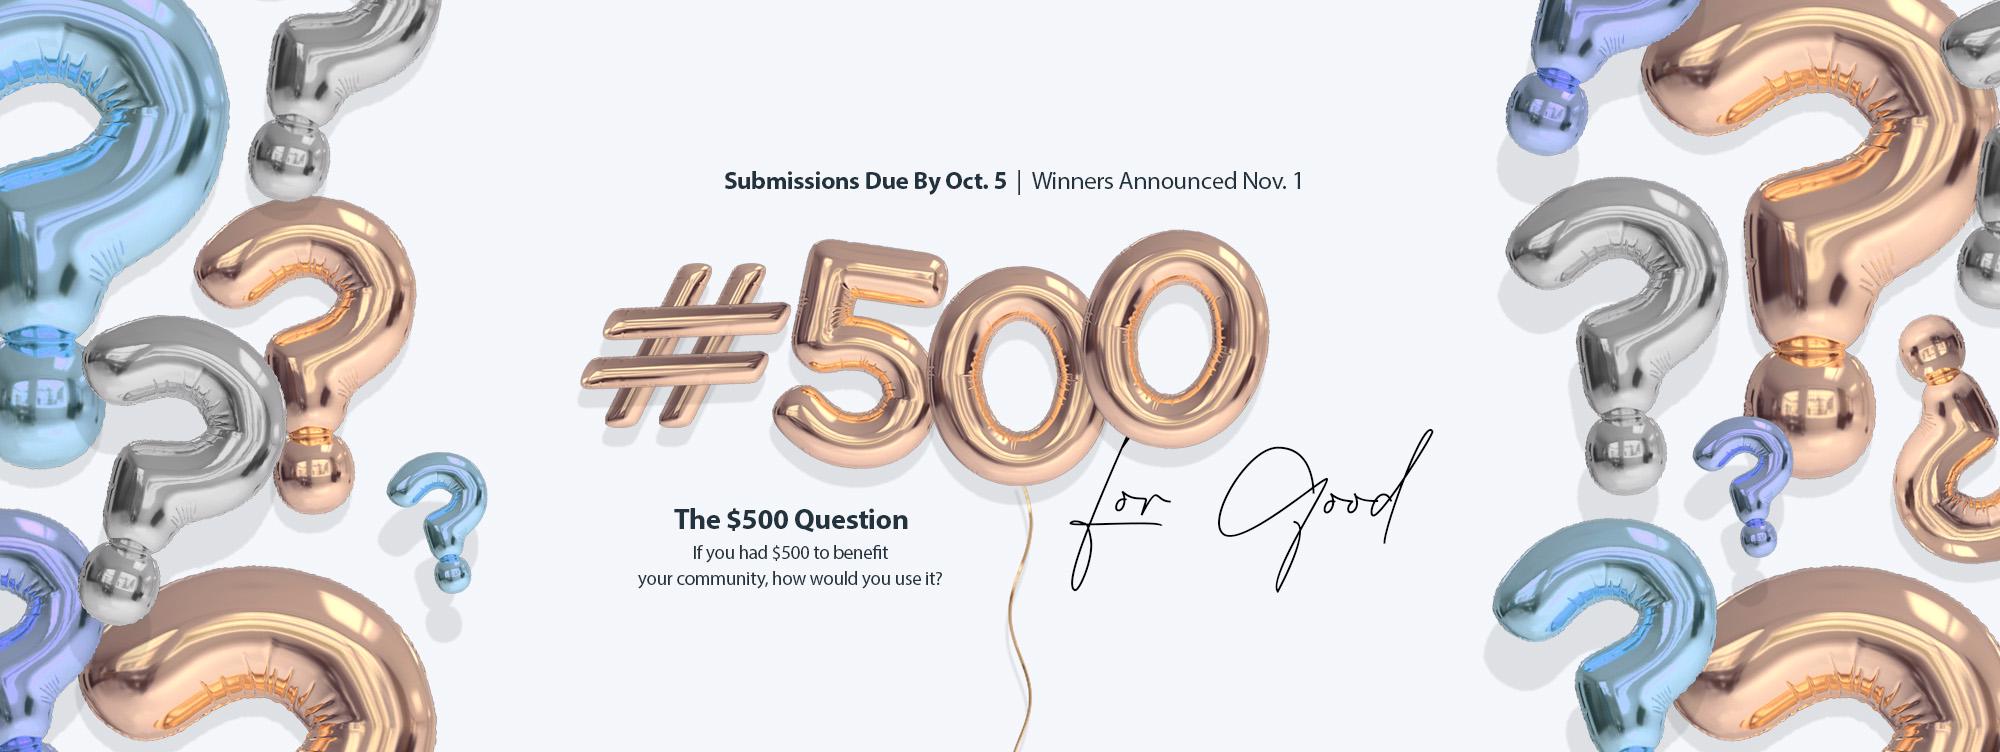 500 for good. If you have $500 to benefit your community, how would you use it?